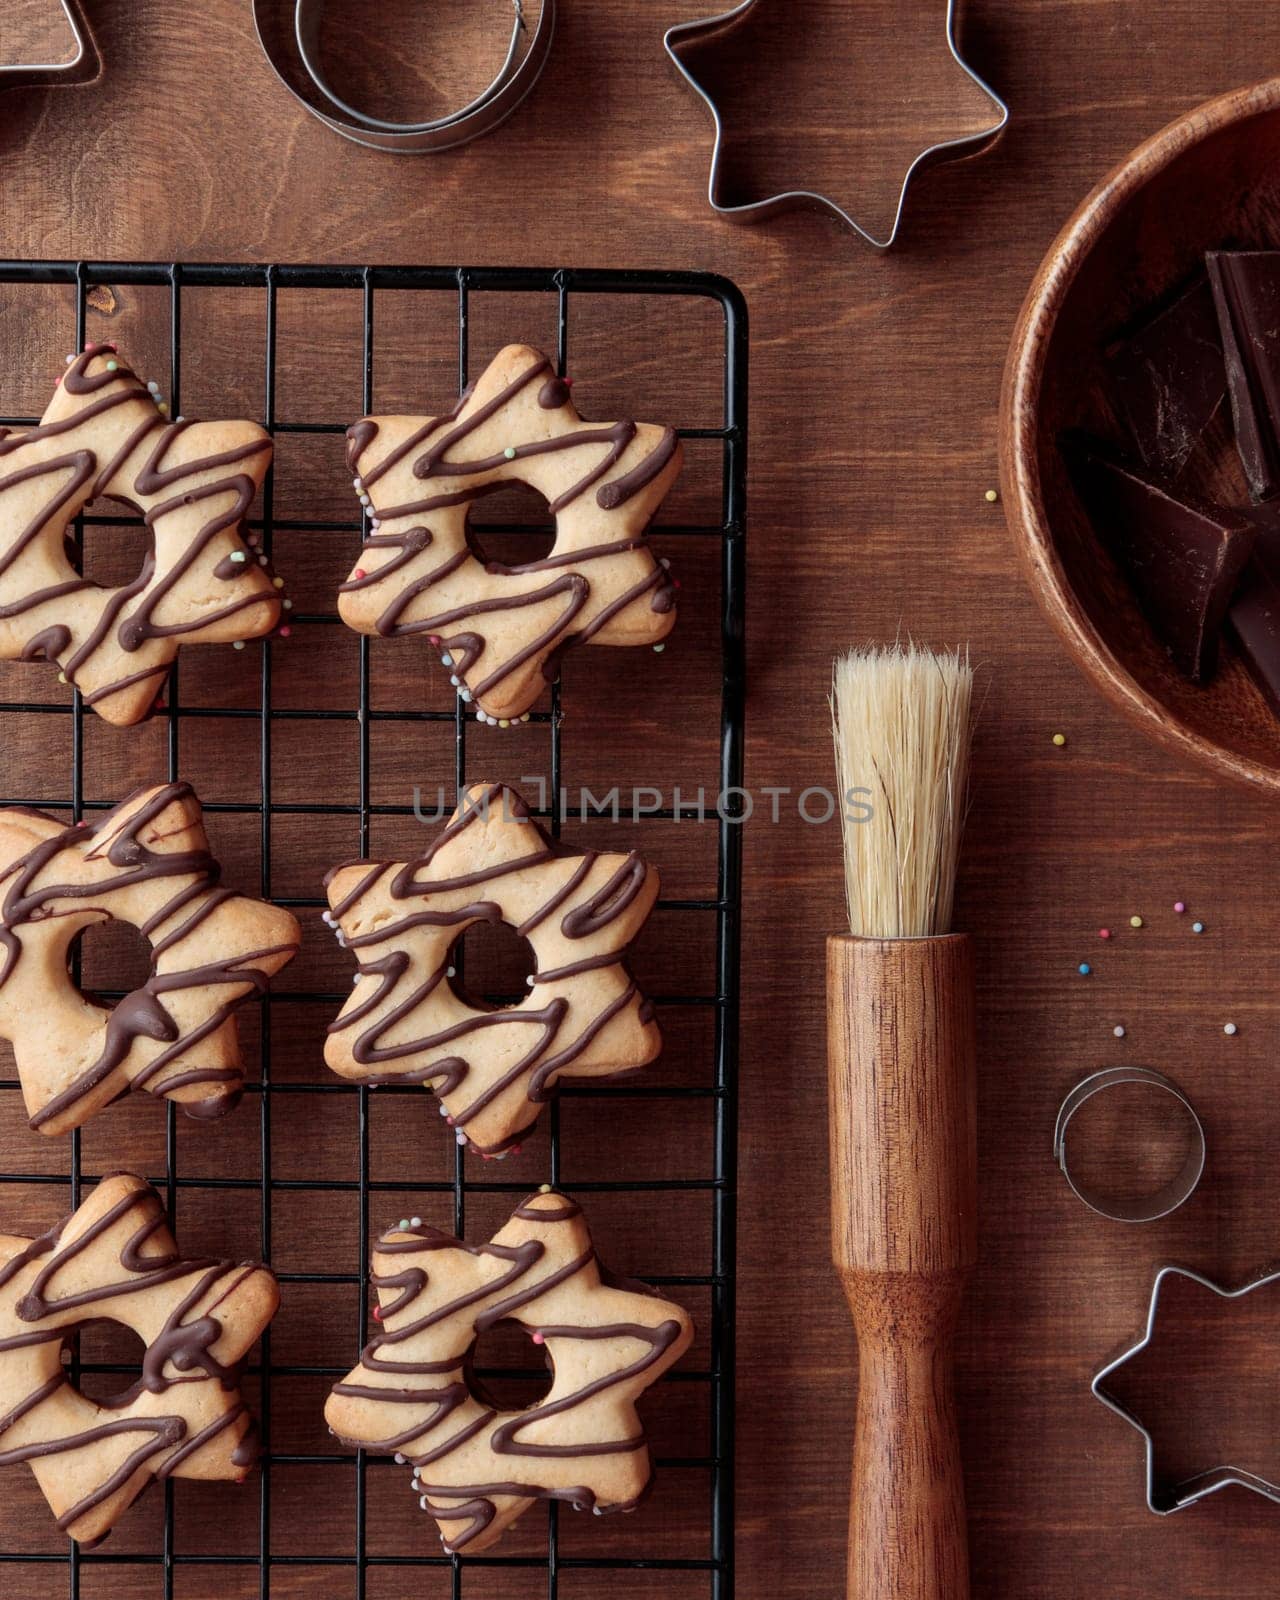 Freshly baked homemade star-shaped cookie with chocolate on the grid on the wooden table